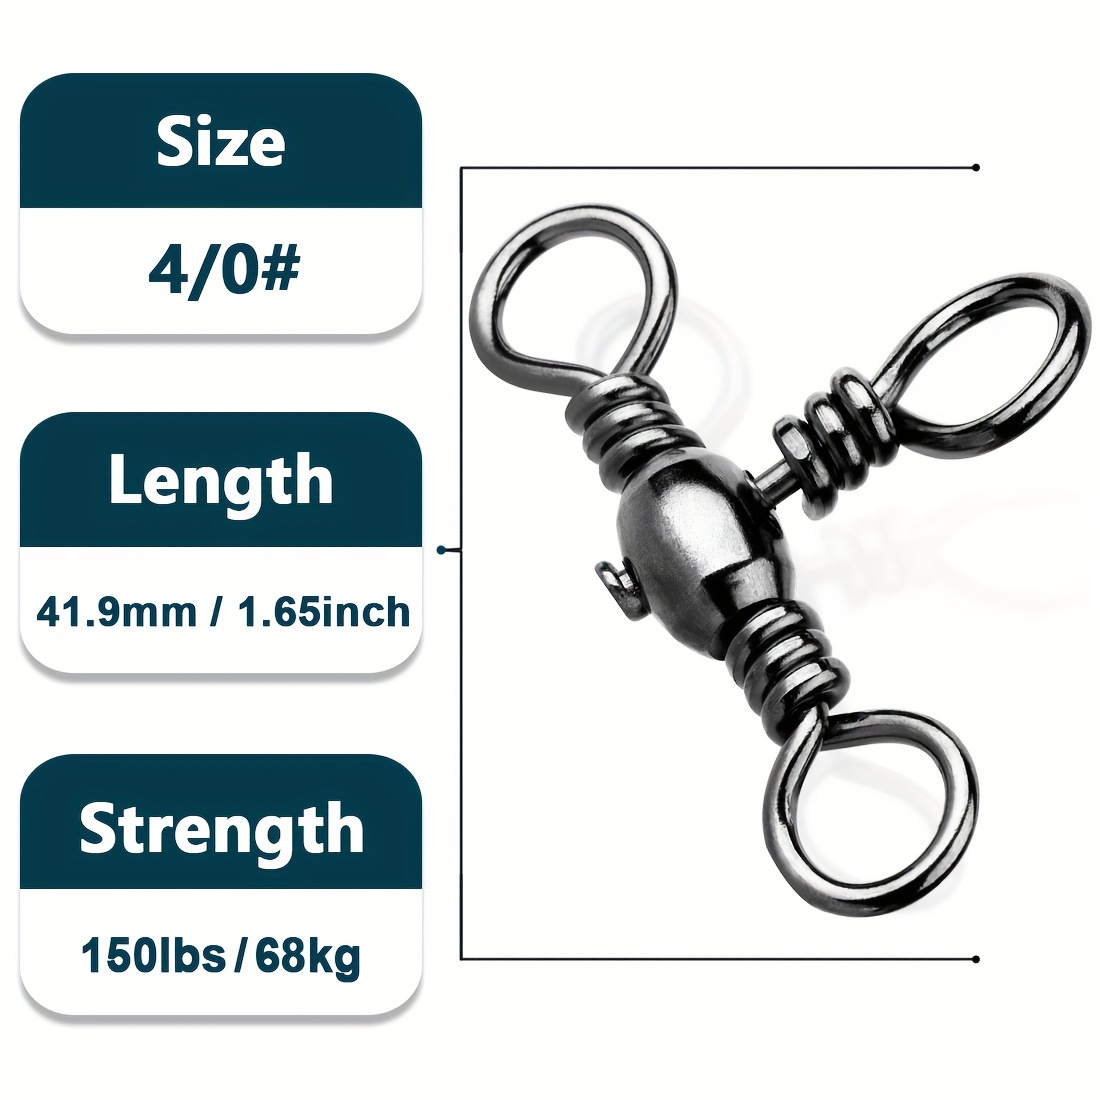  3 Way Swivels Fishing Tackle, 50/100pcs Crossline Barrel  Swivel 3 Way Rigs T-Shape Three Way Swivels Fishing Tackle Connector For  Catfish Rig Surf Fishing Rig